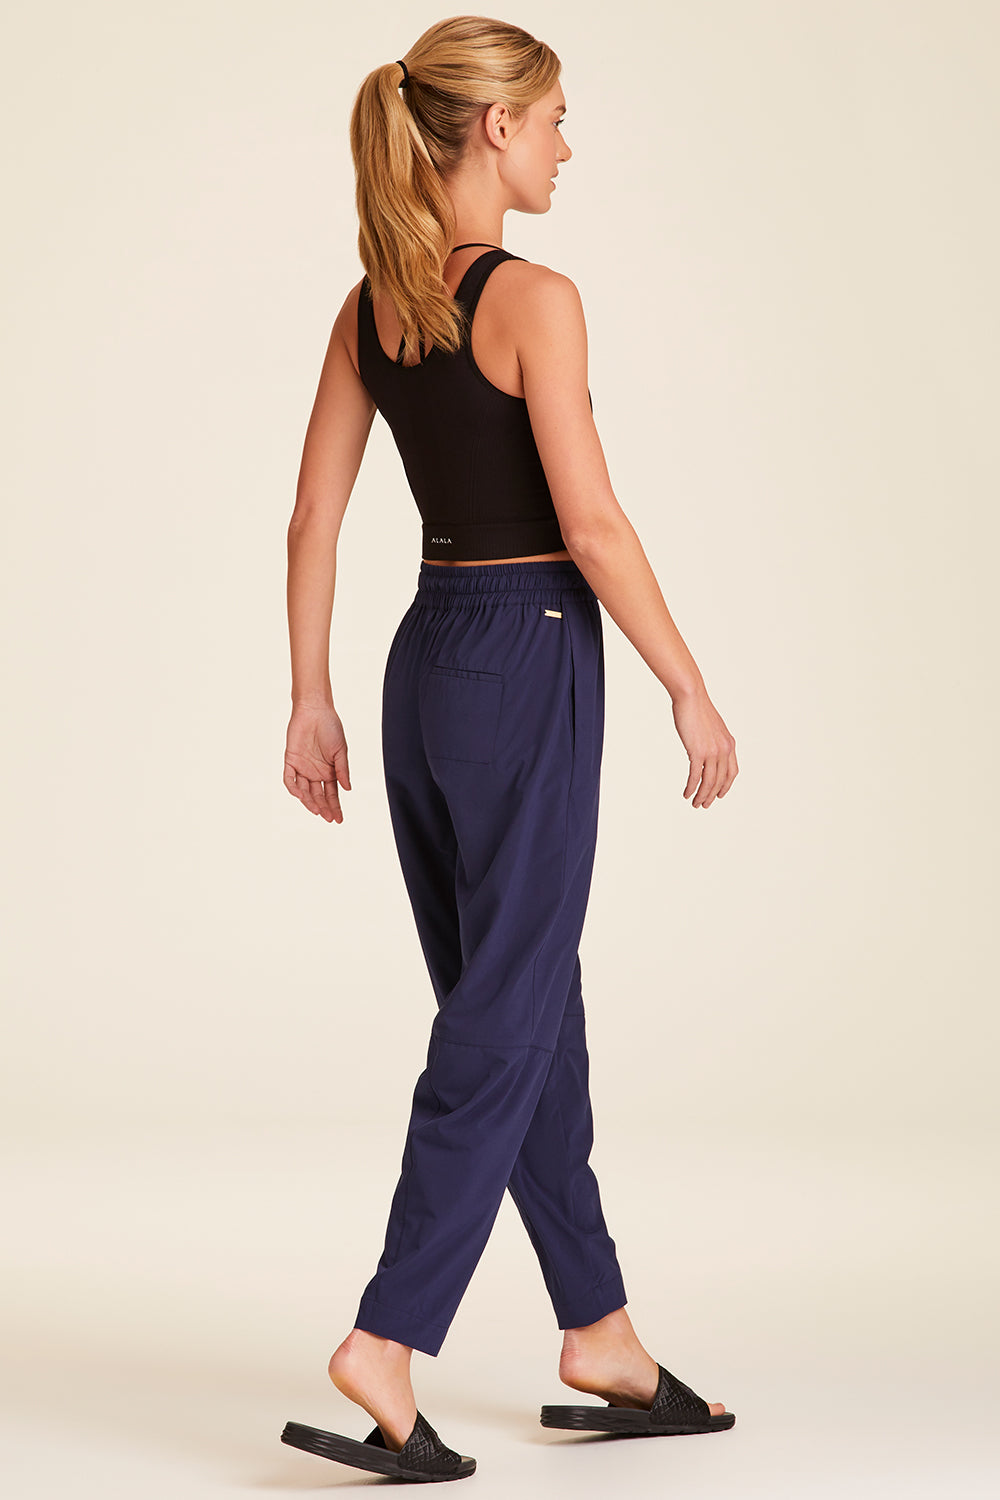 Commuter Pant - Navy Elevated Pants, High Waisted Pants Women